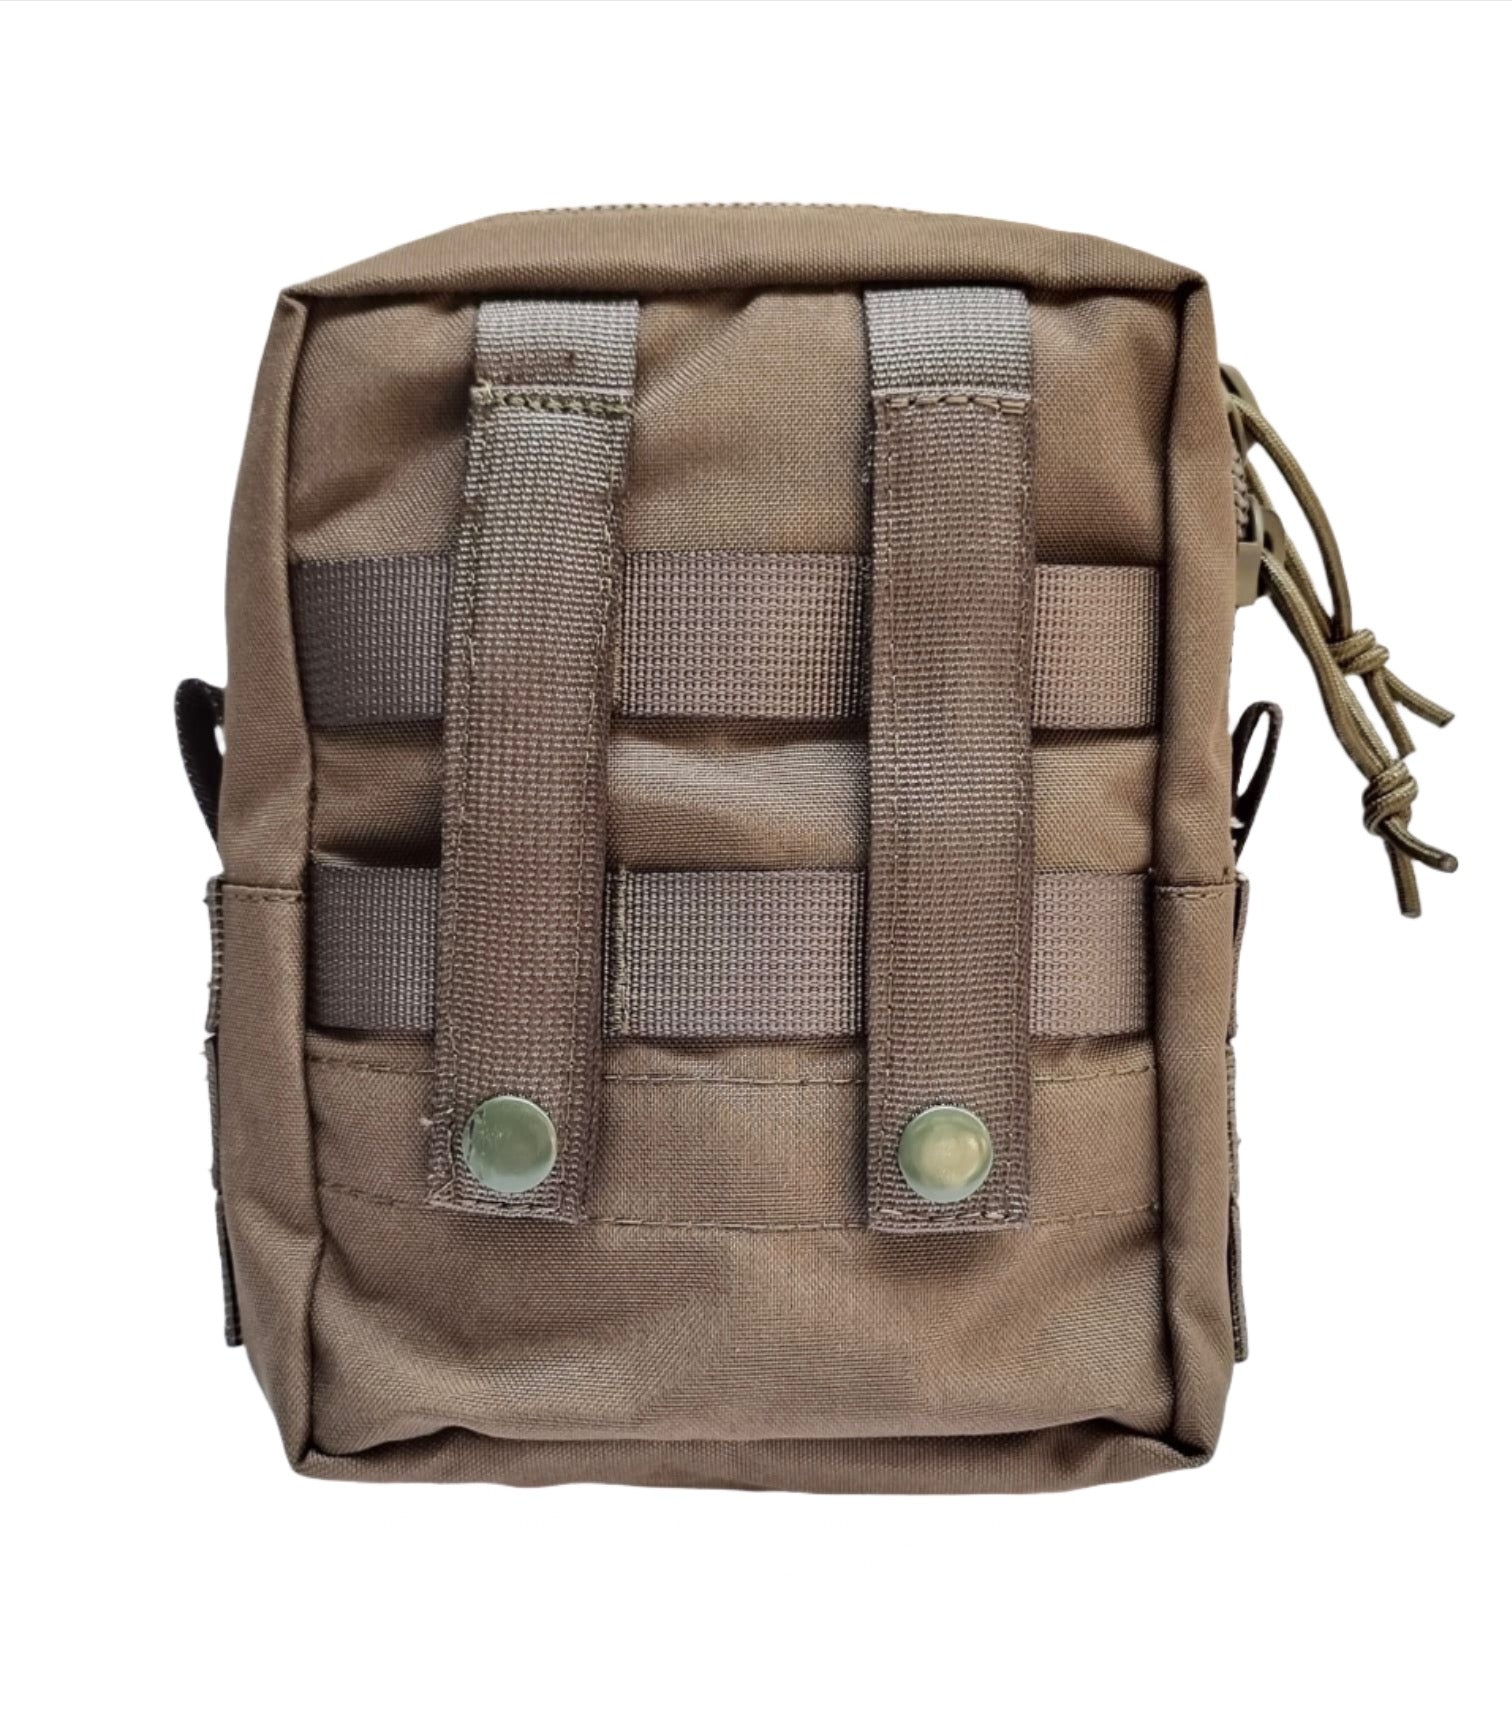  Shadow Strategic Multi Purpose Utility pouch  Color Army Green.